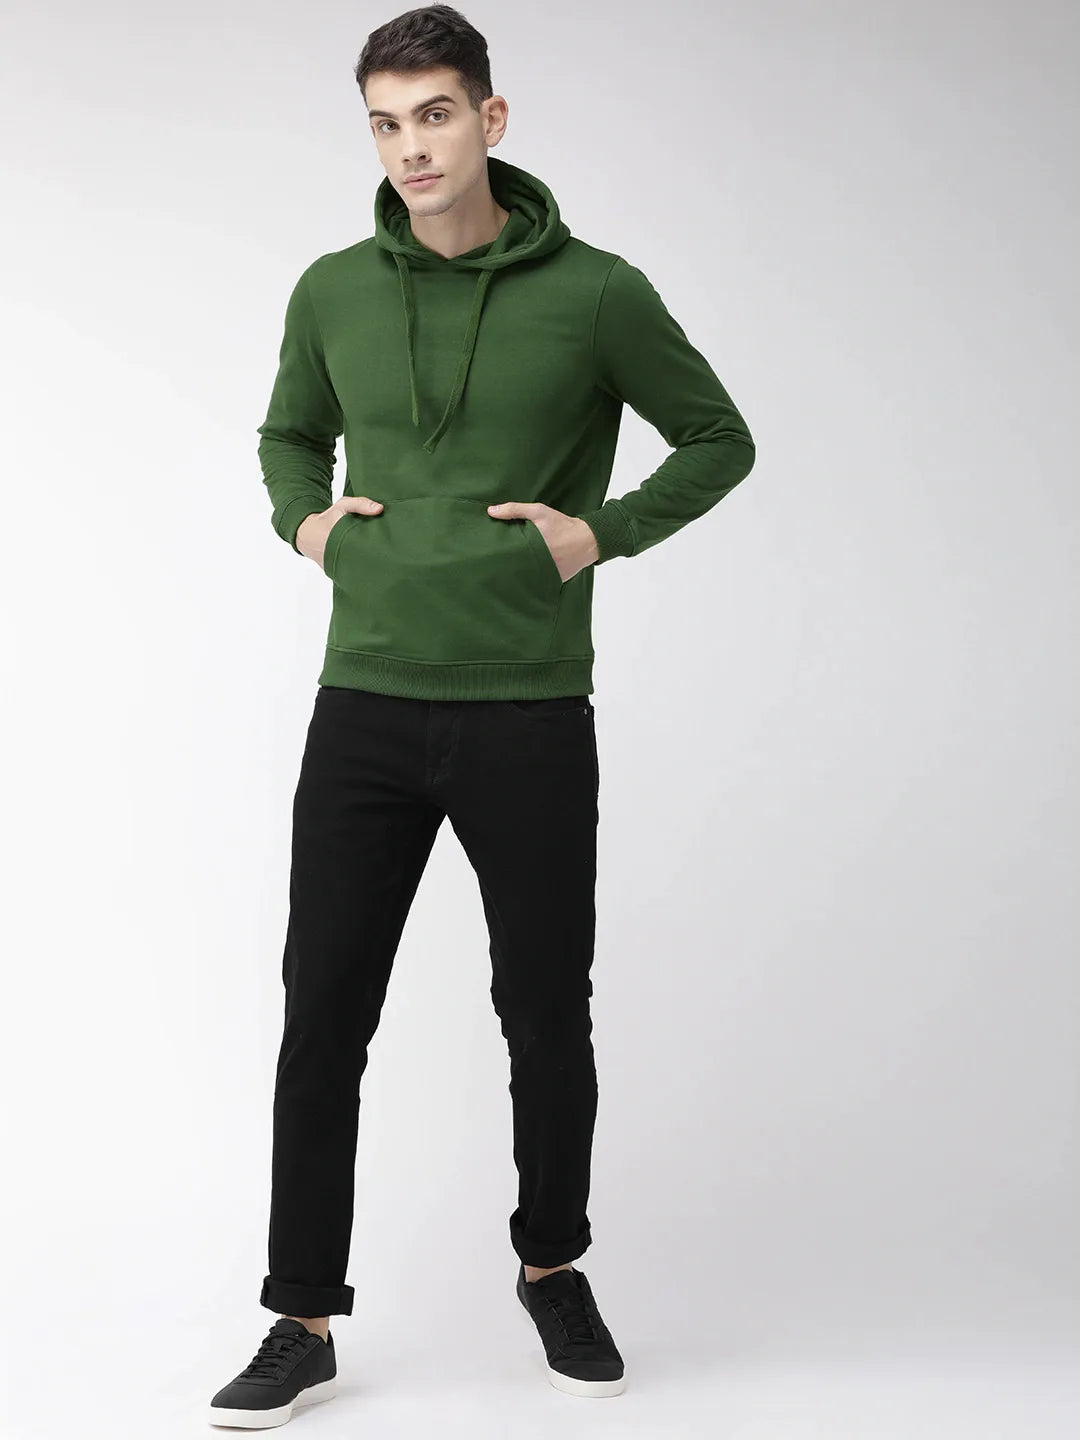 Full Sleeves Cotton Hoodie For Men and Women (Unisex) Dark green Color